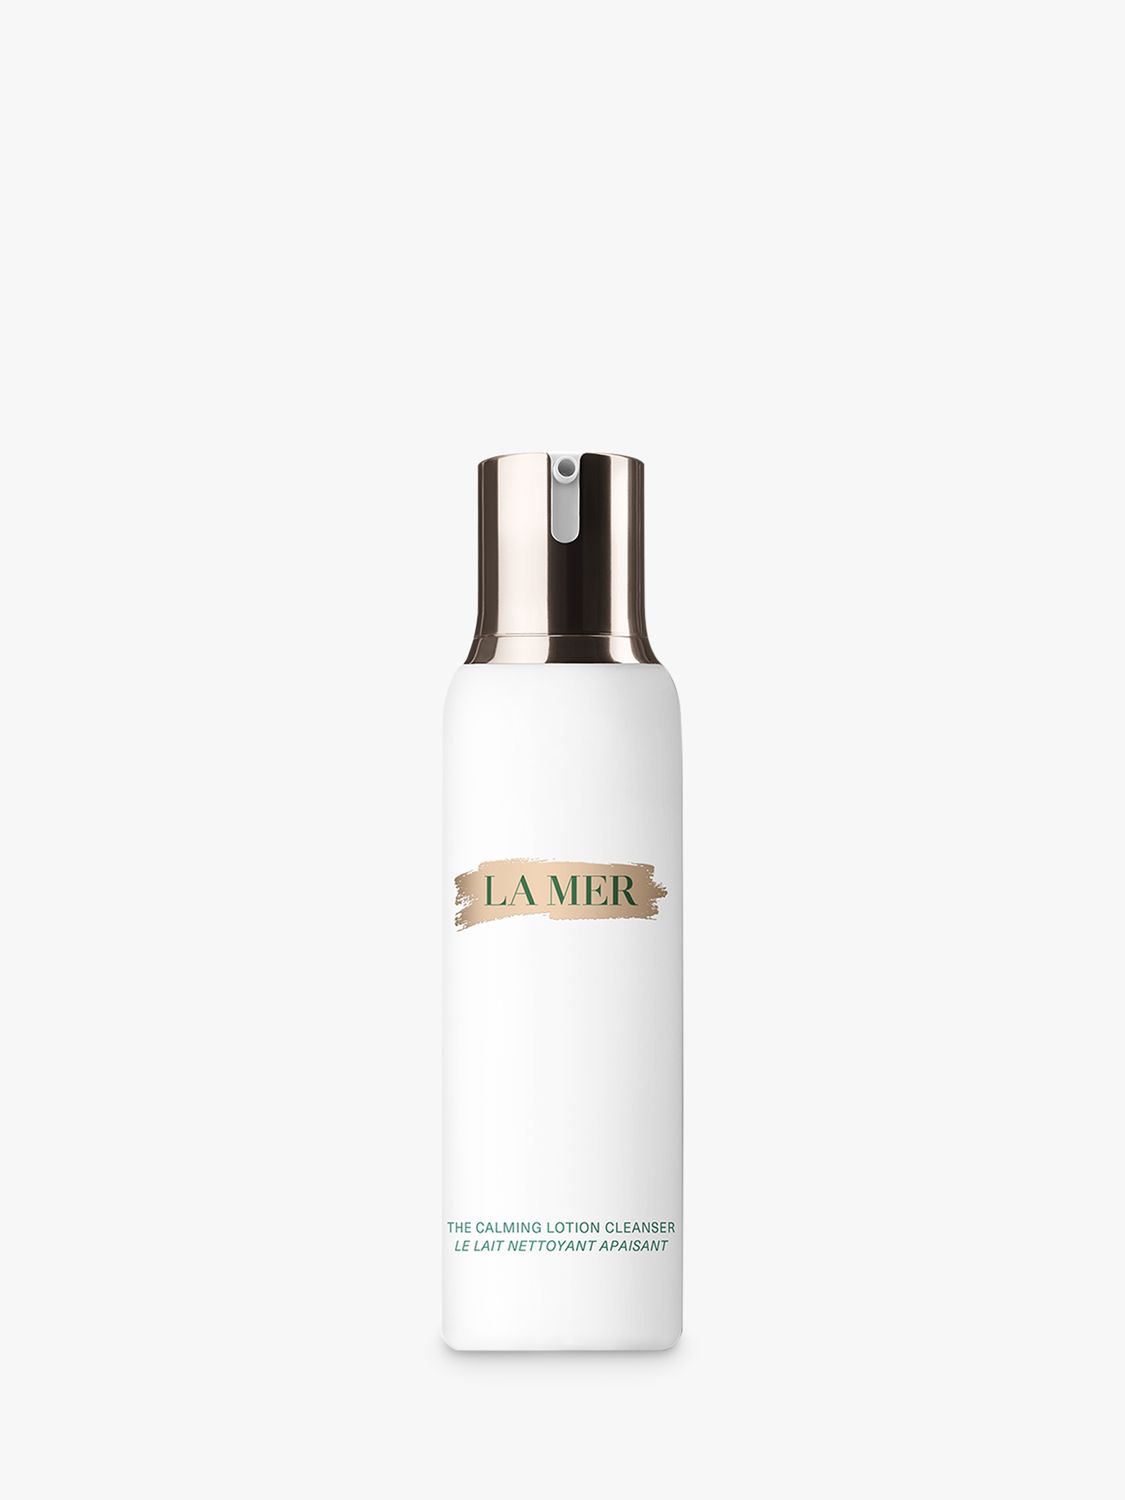 La Mer The Calming Lotion Cleanser, 200ml 1